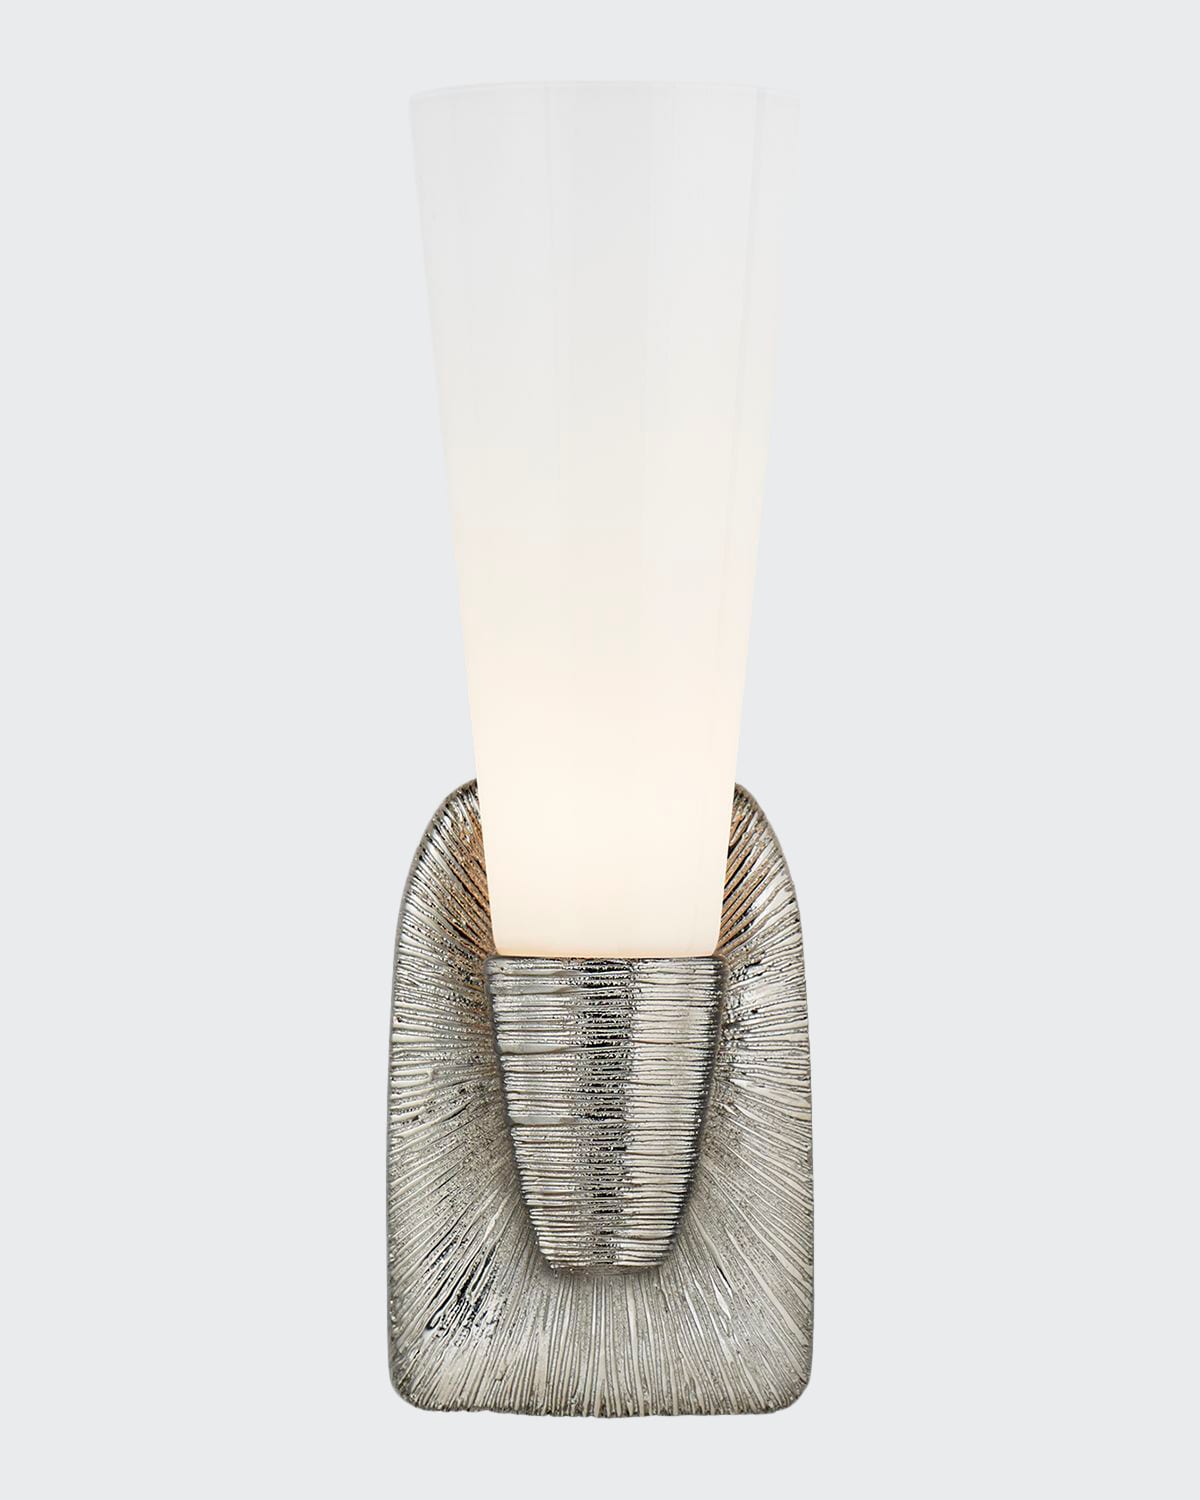 Kelly Wearstler For Visual Comfort Signature Utopia Small Single Bath Sconce In Polished Nickel